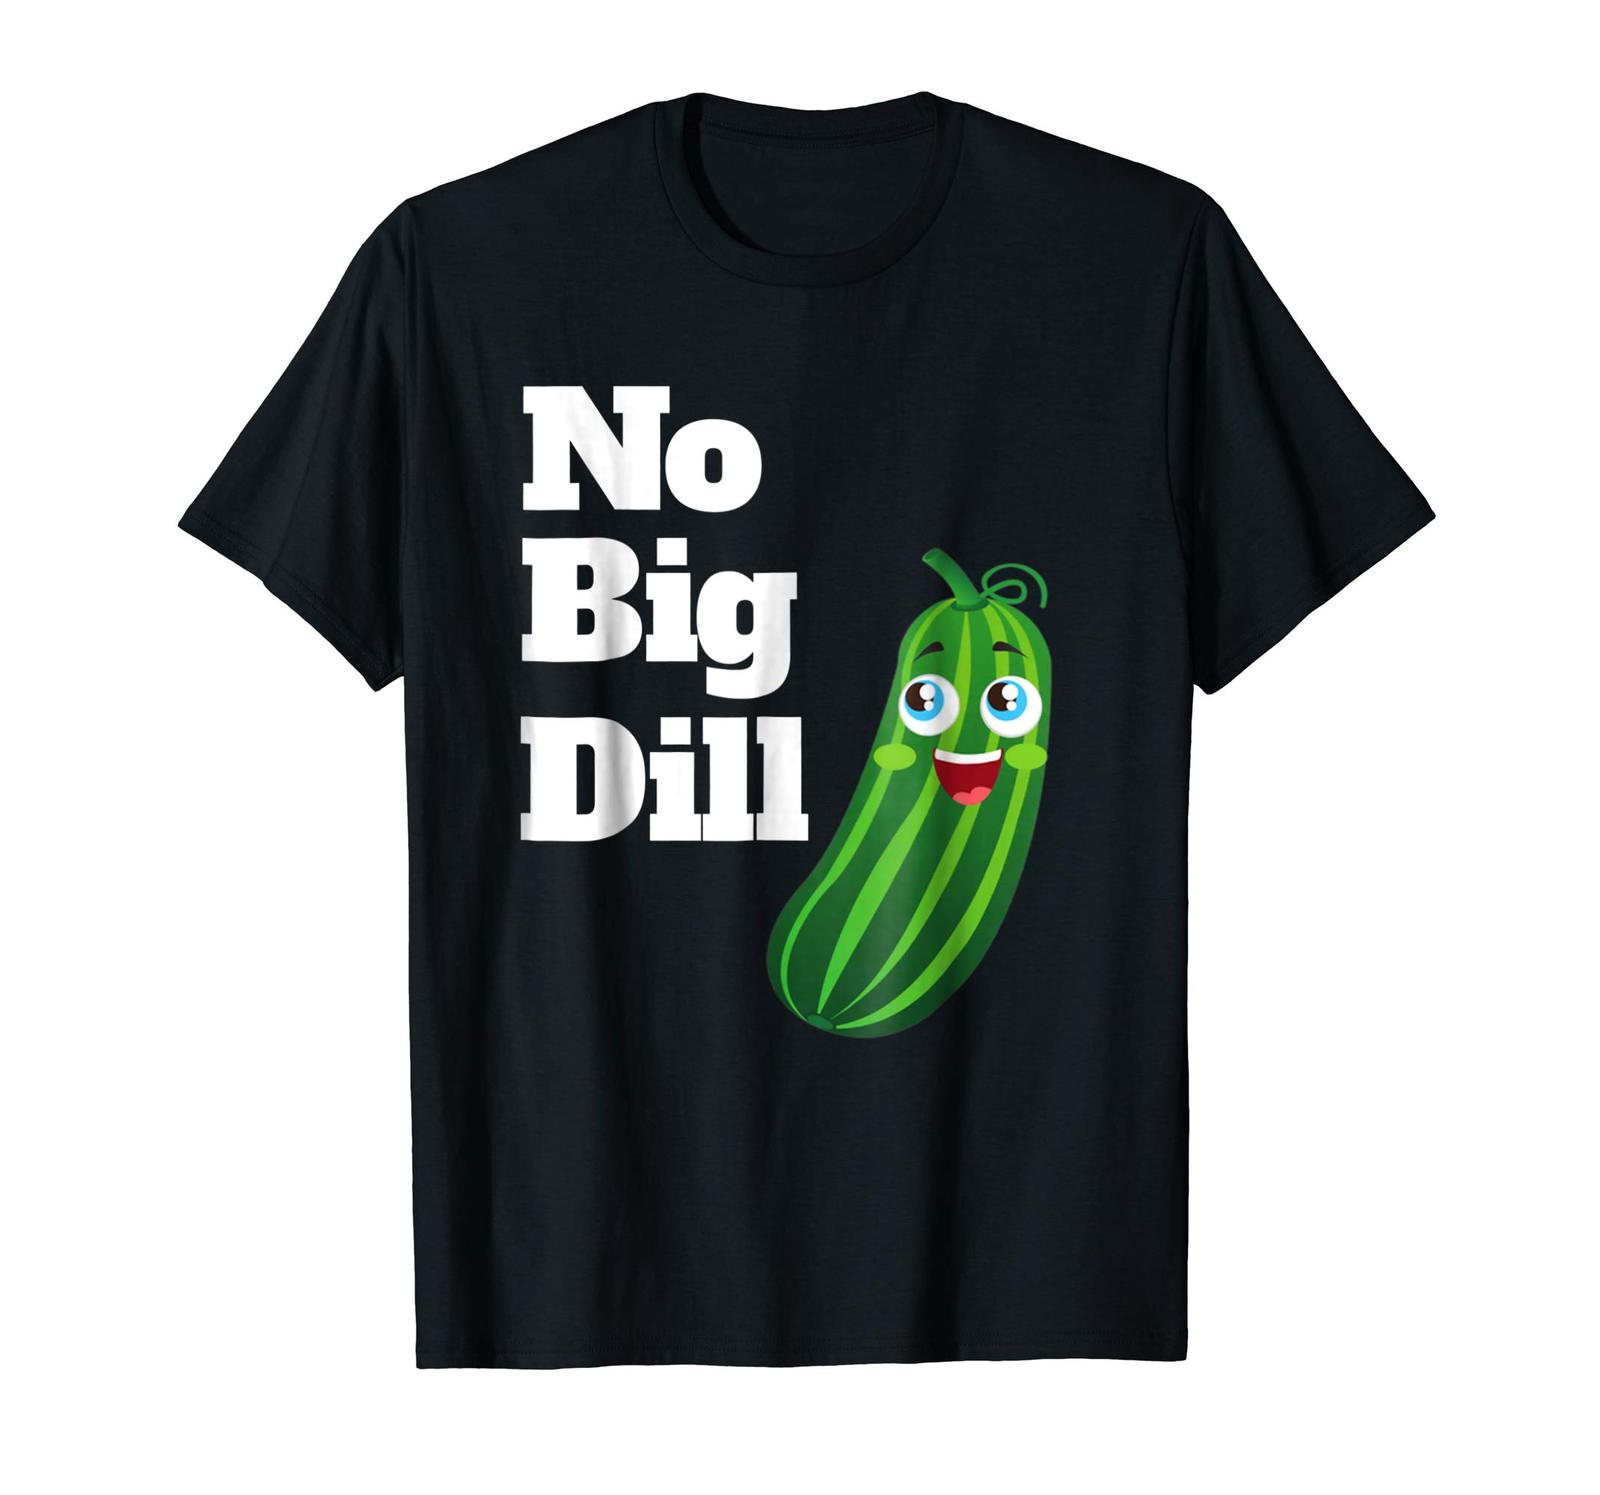 Dog Fashion - No Big Dill Pickle T-shirt Funny NBD Deal Teen Graphic ...